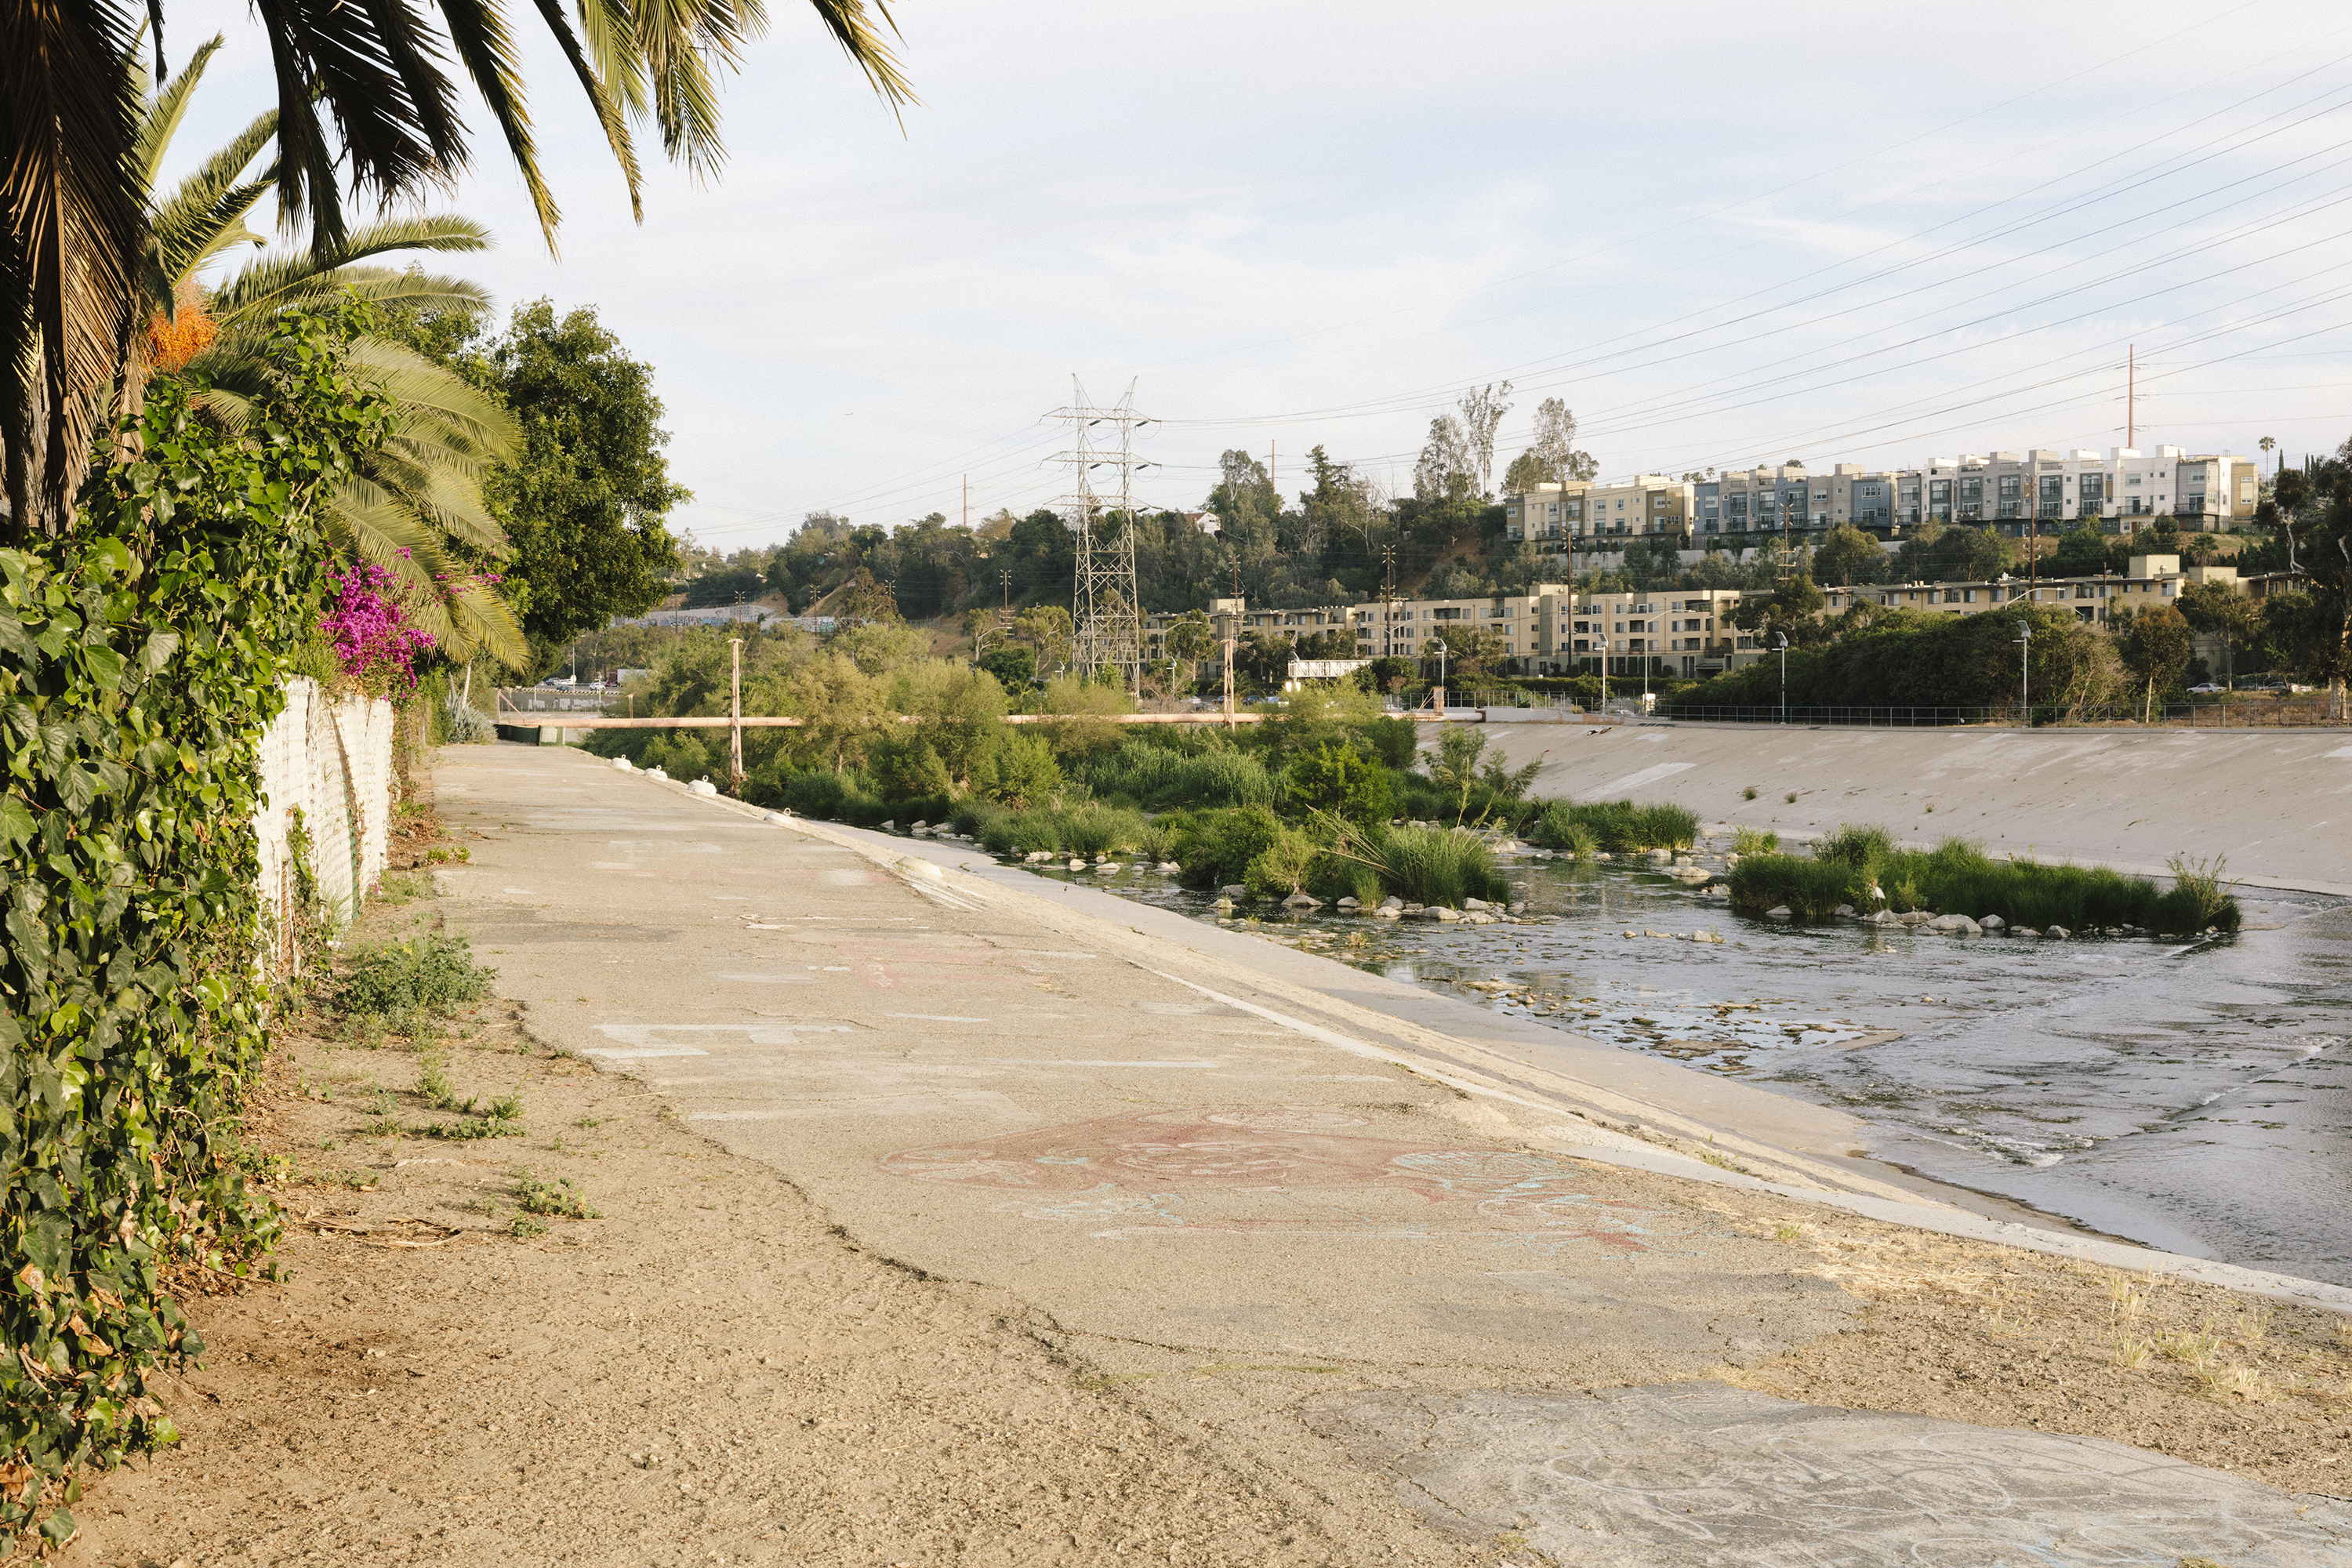 A sidewalk path along a riverbed. There are buildings in the distance.